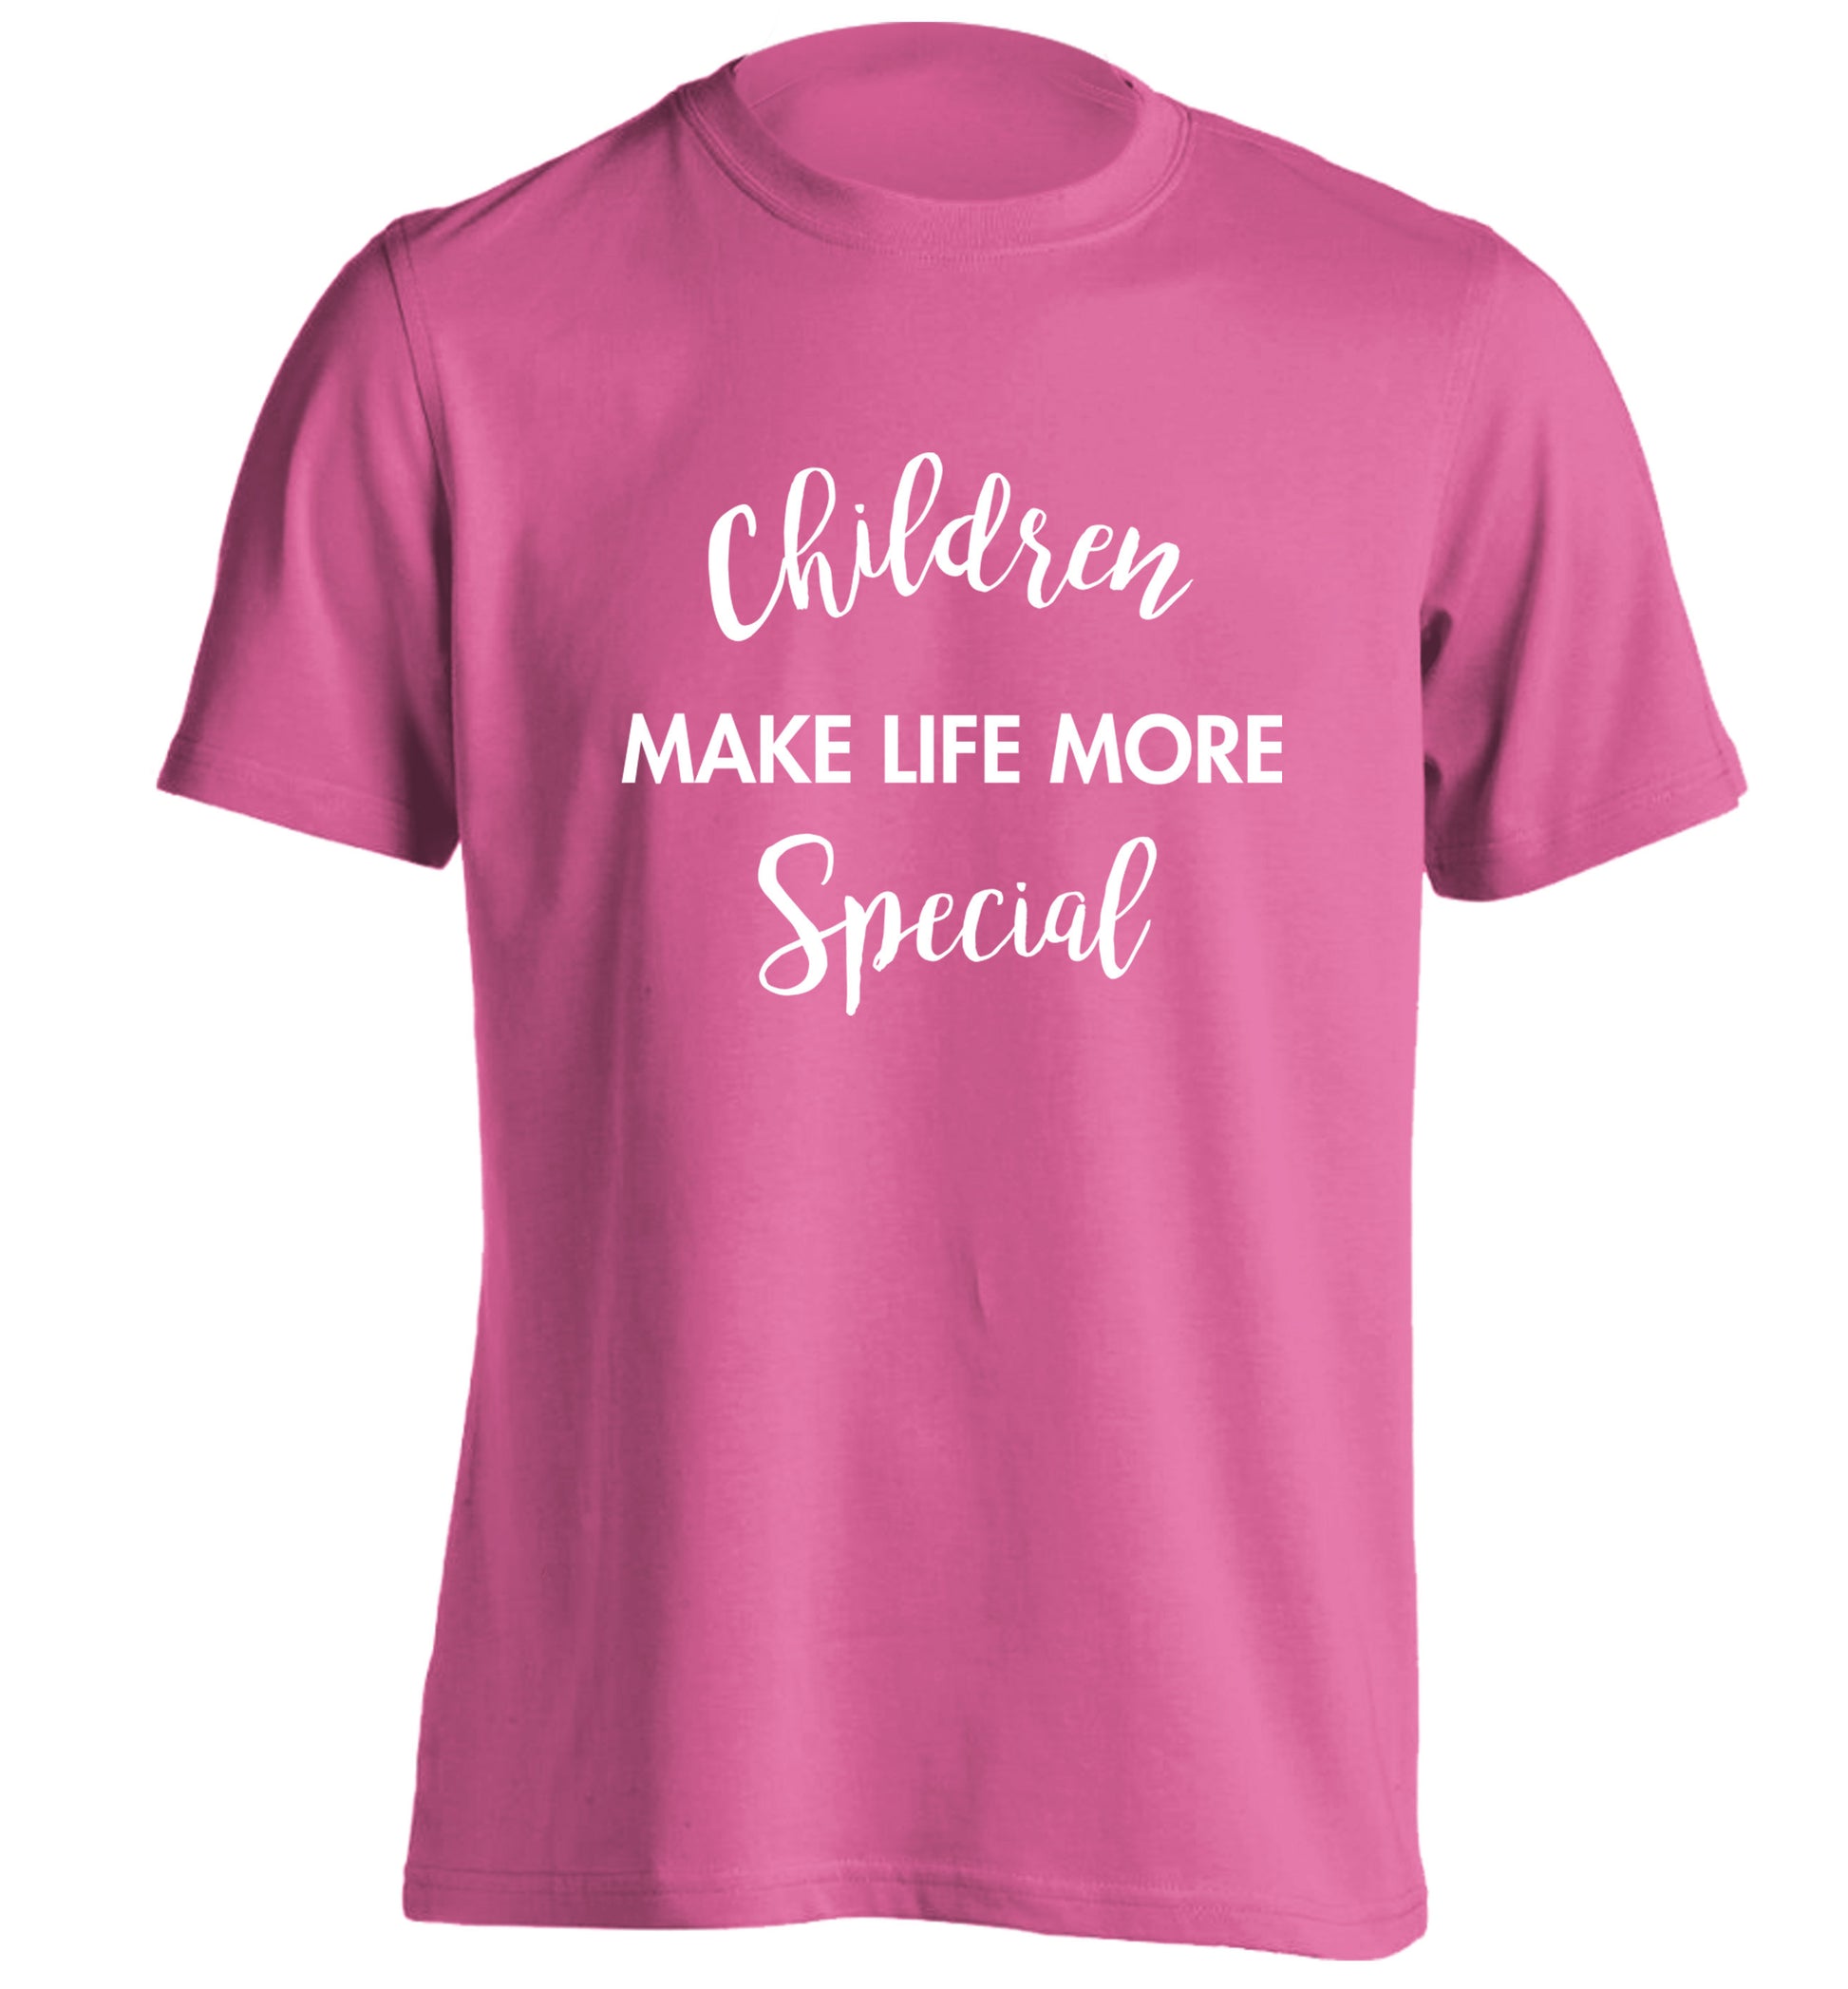 Children make life more special adults unisex pink Tshirt 2XL